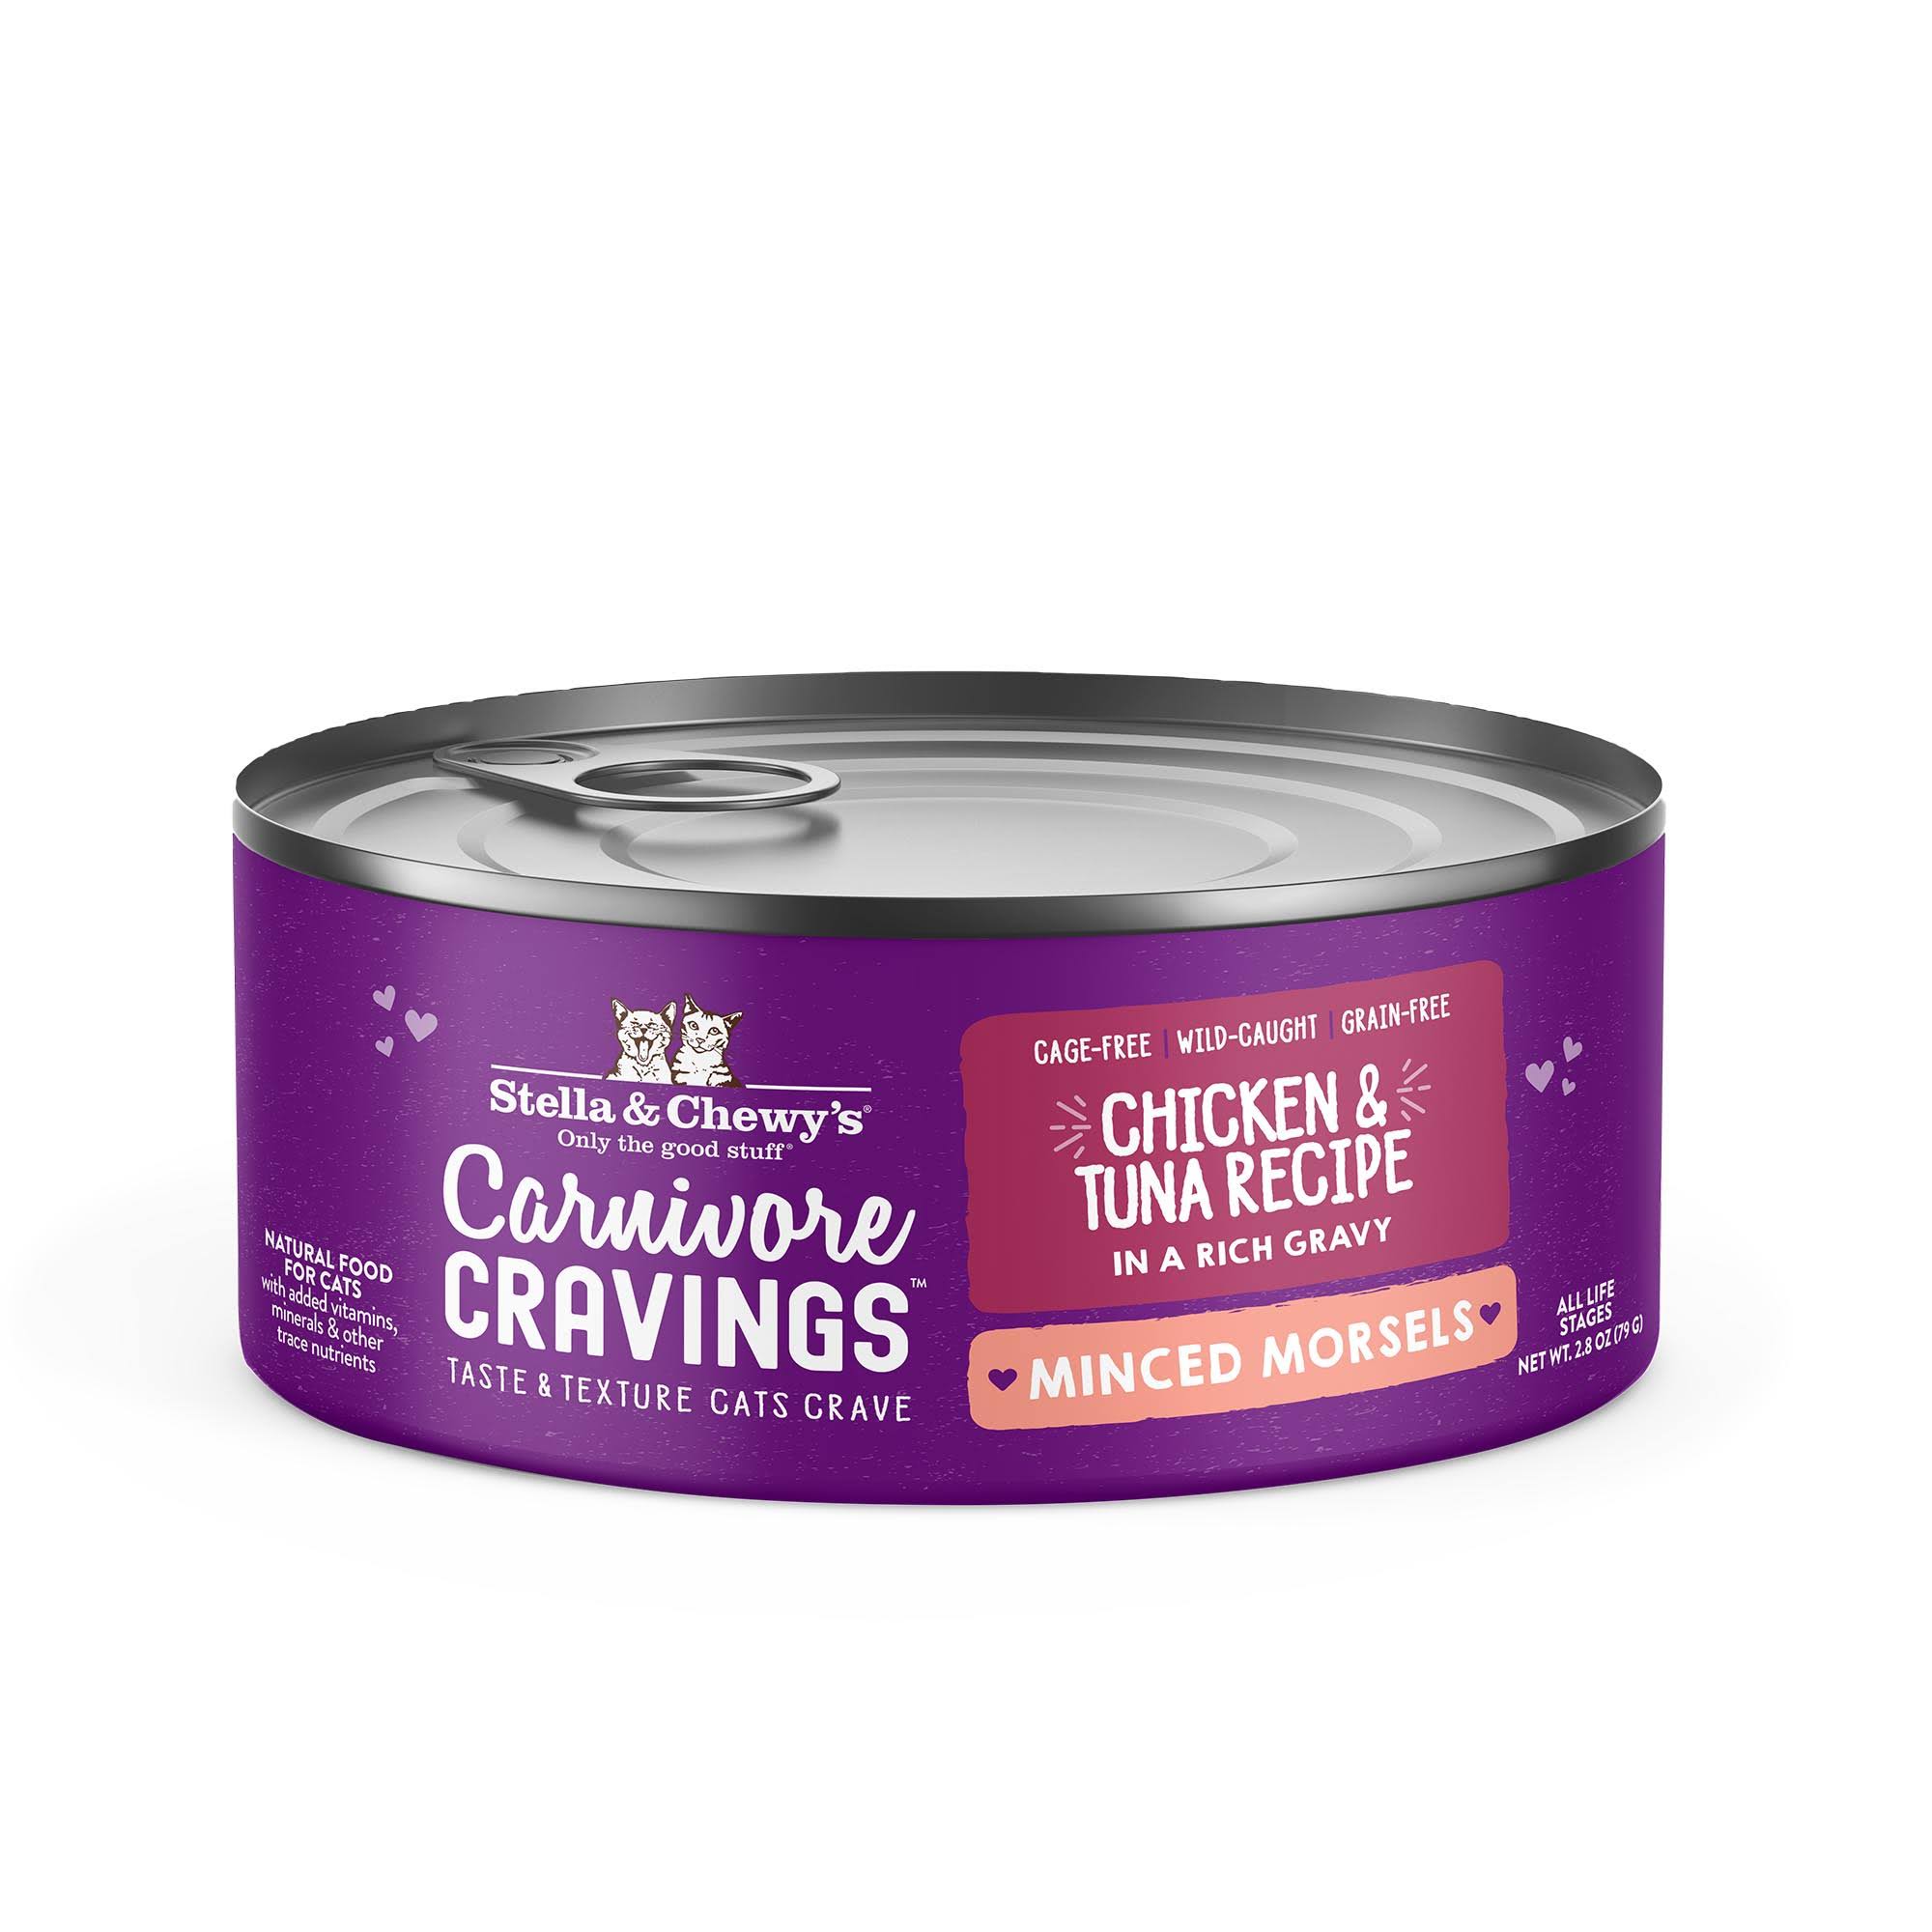 Stella & Chewy's Carnivore Cravings Minced Morsels Chicken & Tuna Recipe Wet Cat Food, 2.8-oz